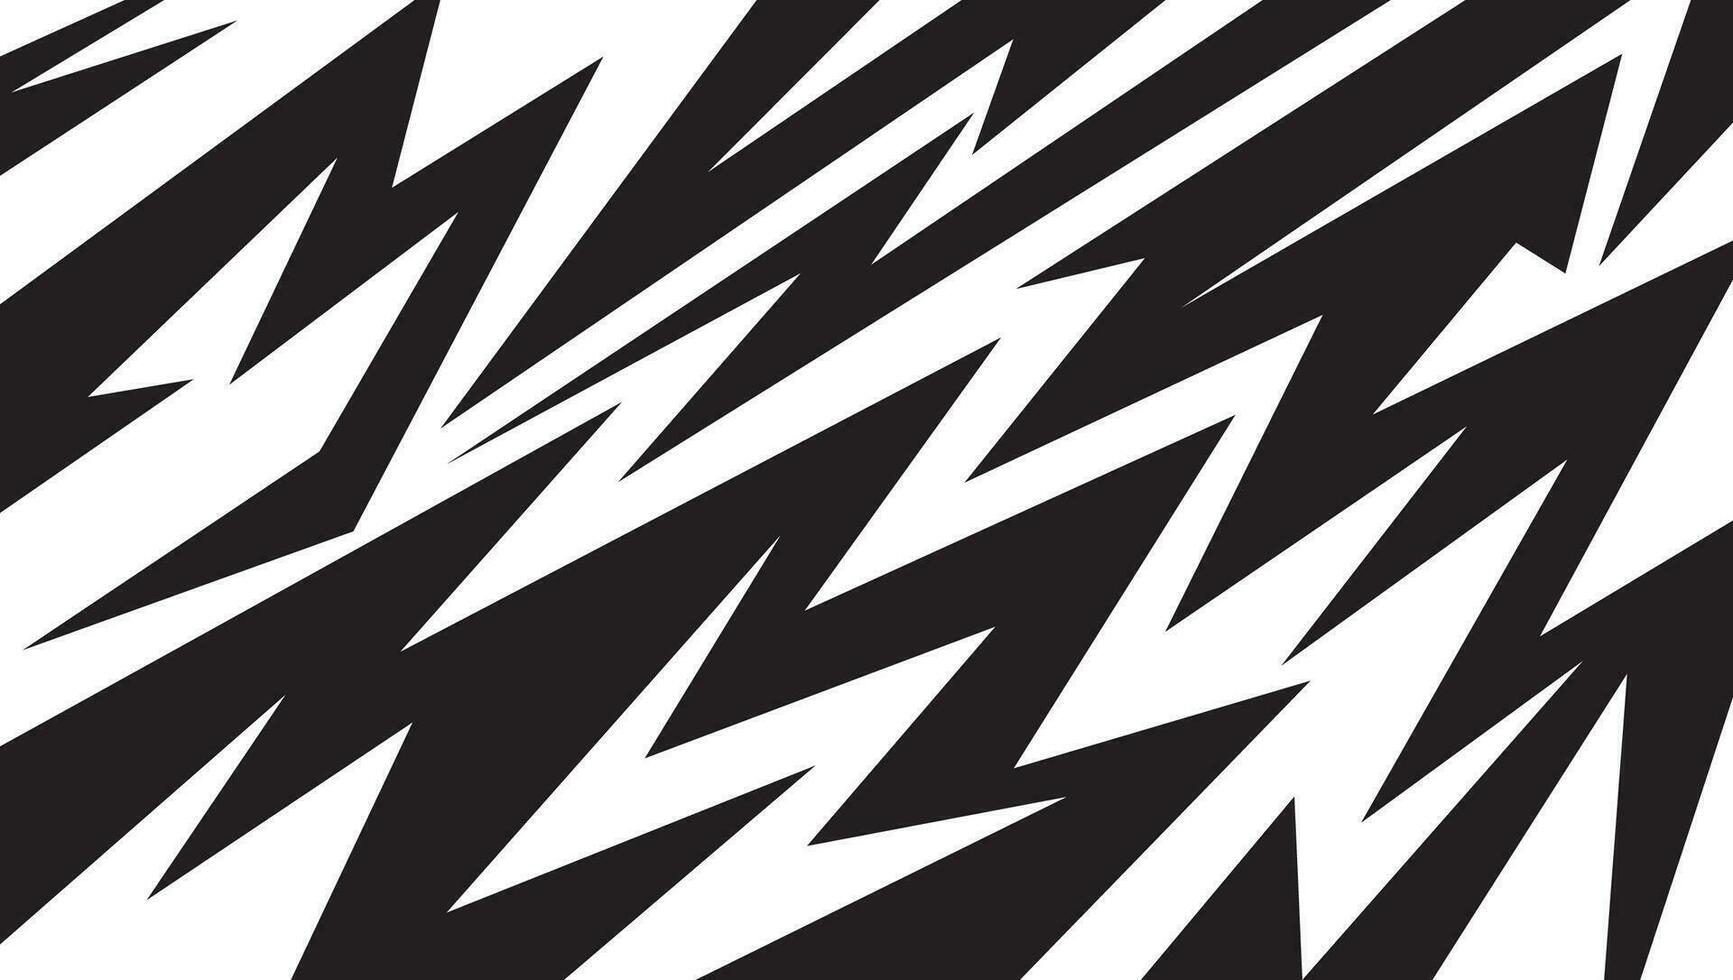 Monochrome backdrop with edgy spikes and dynamic zigzag lines pattern vector